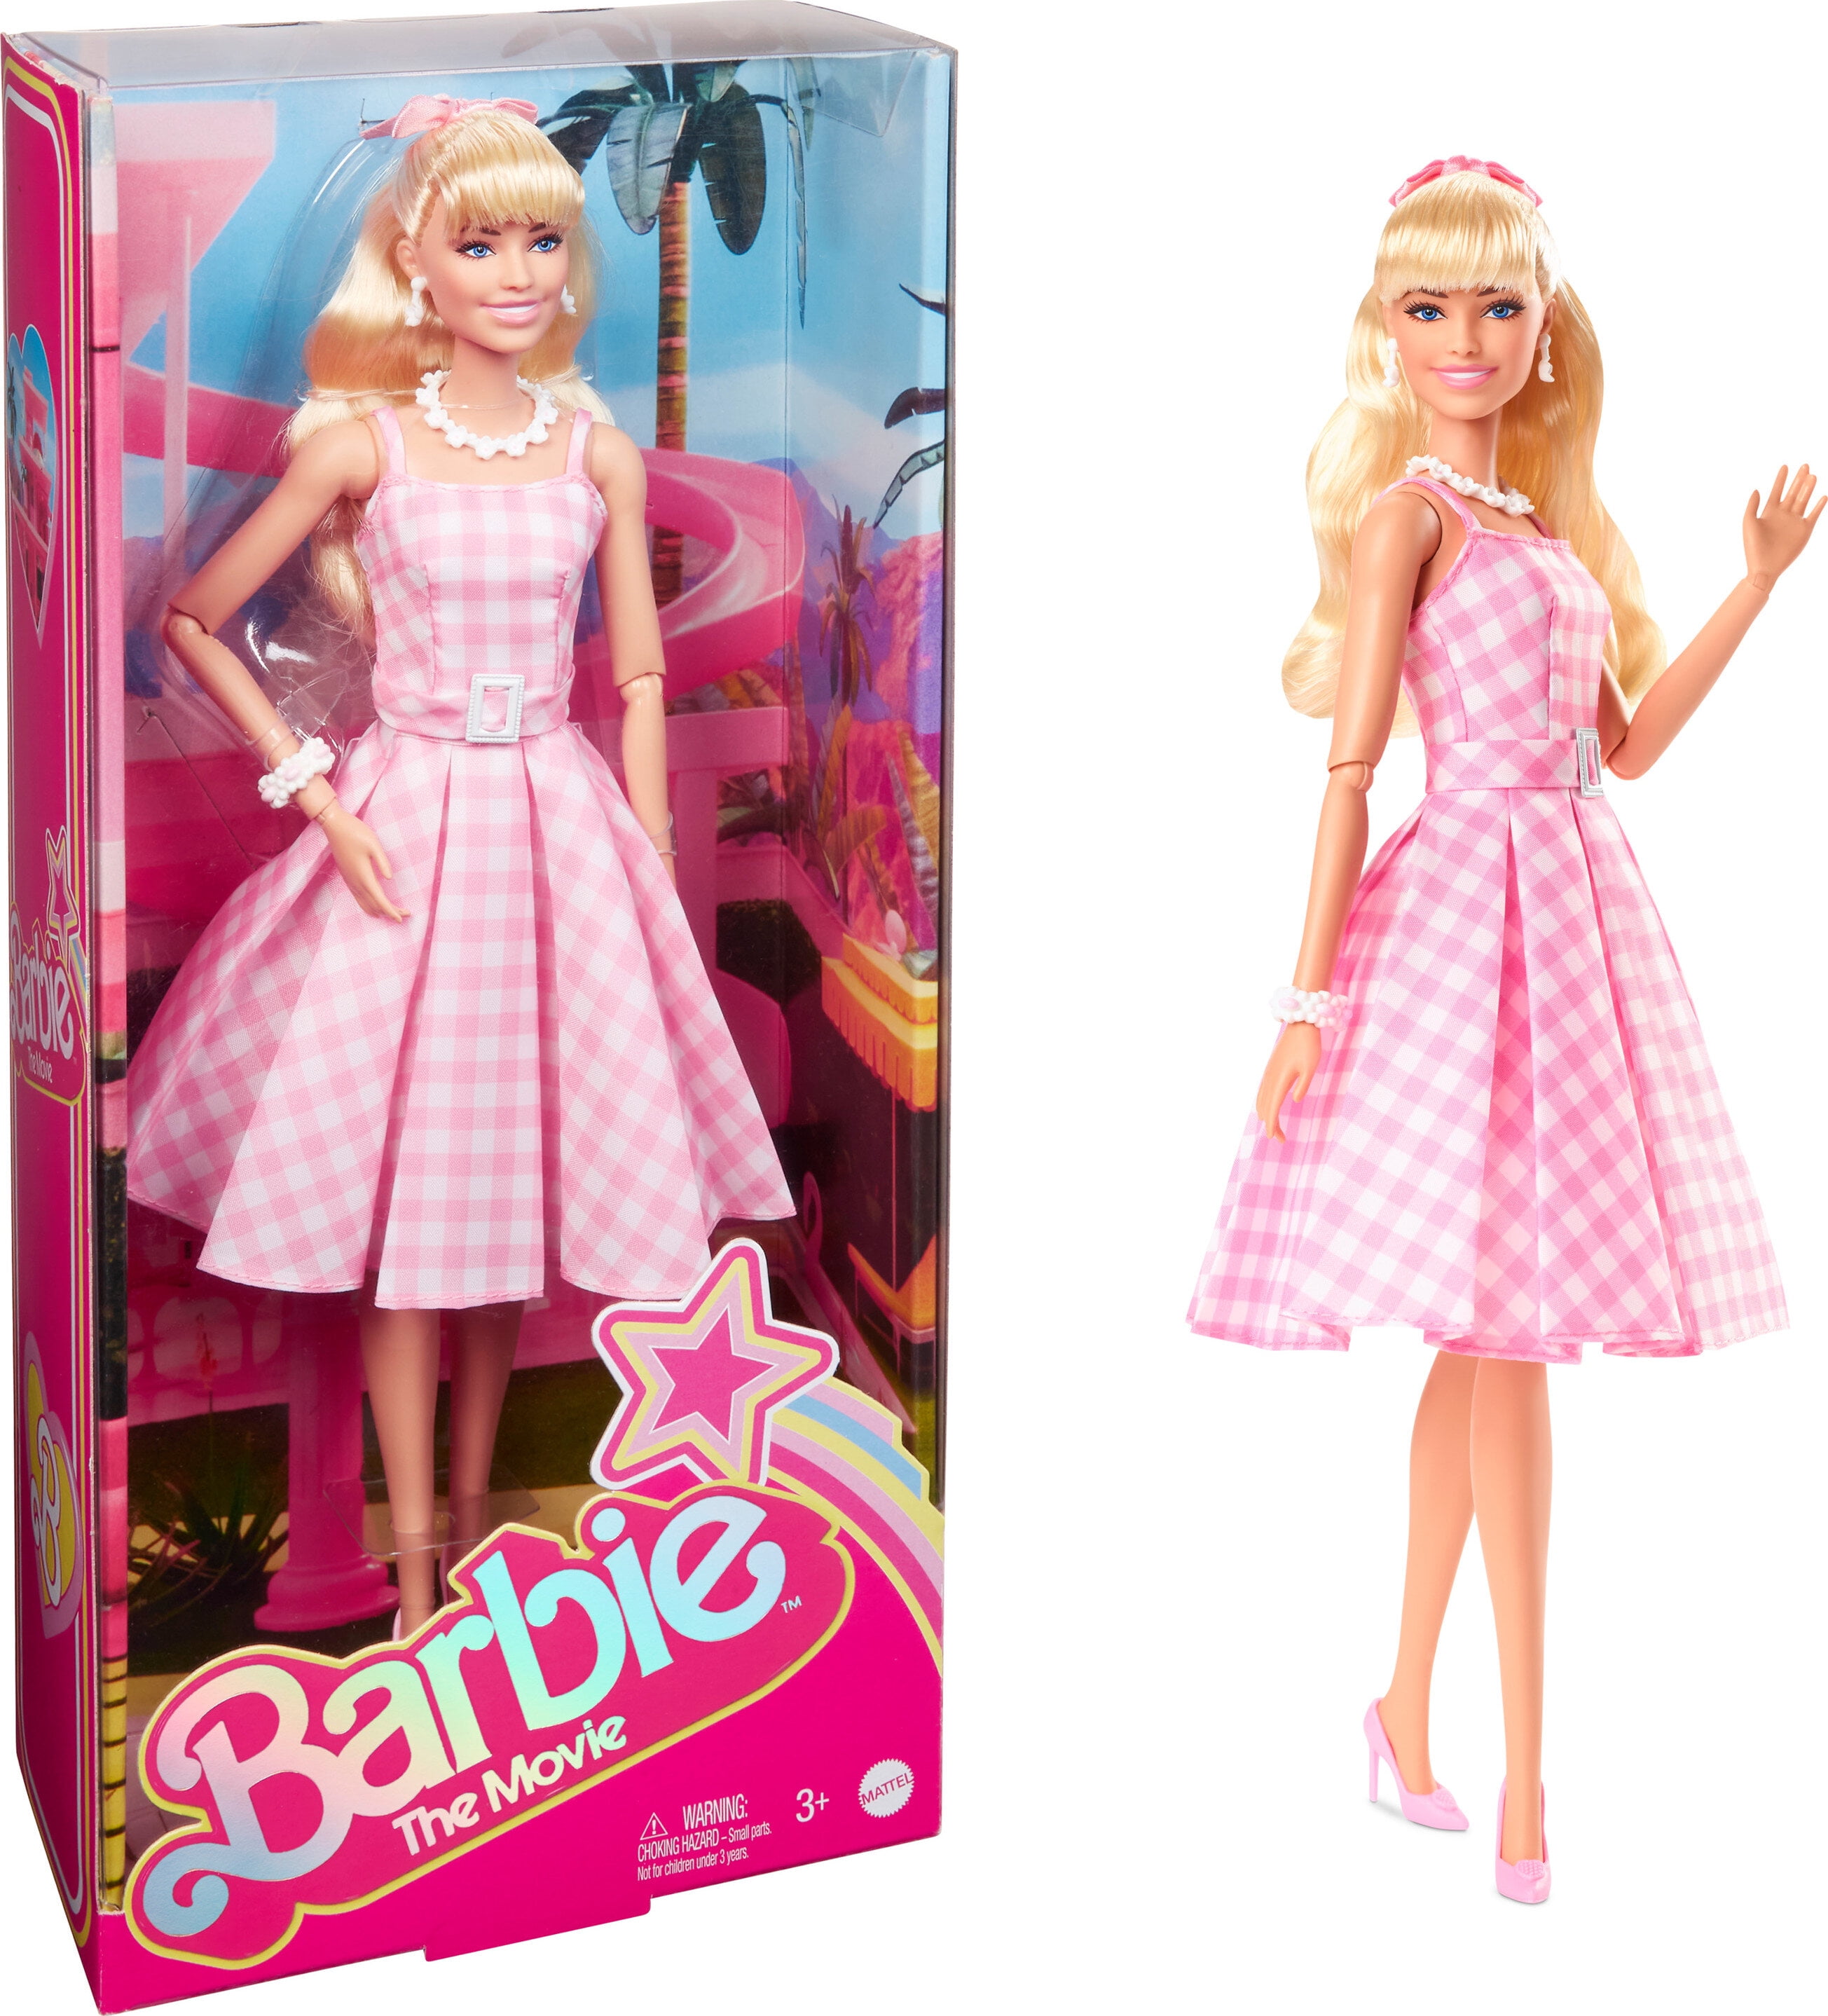 50 Barbie Toy Deals For Up to 60% Off at